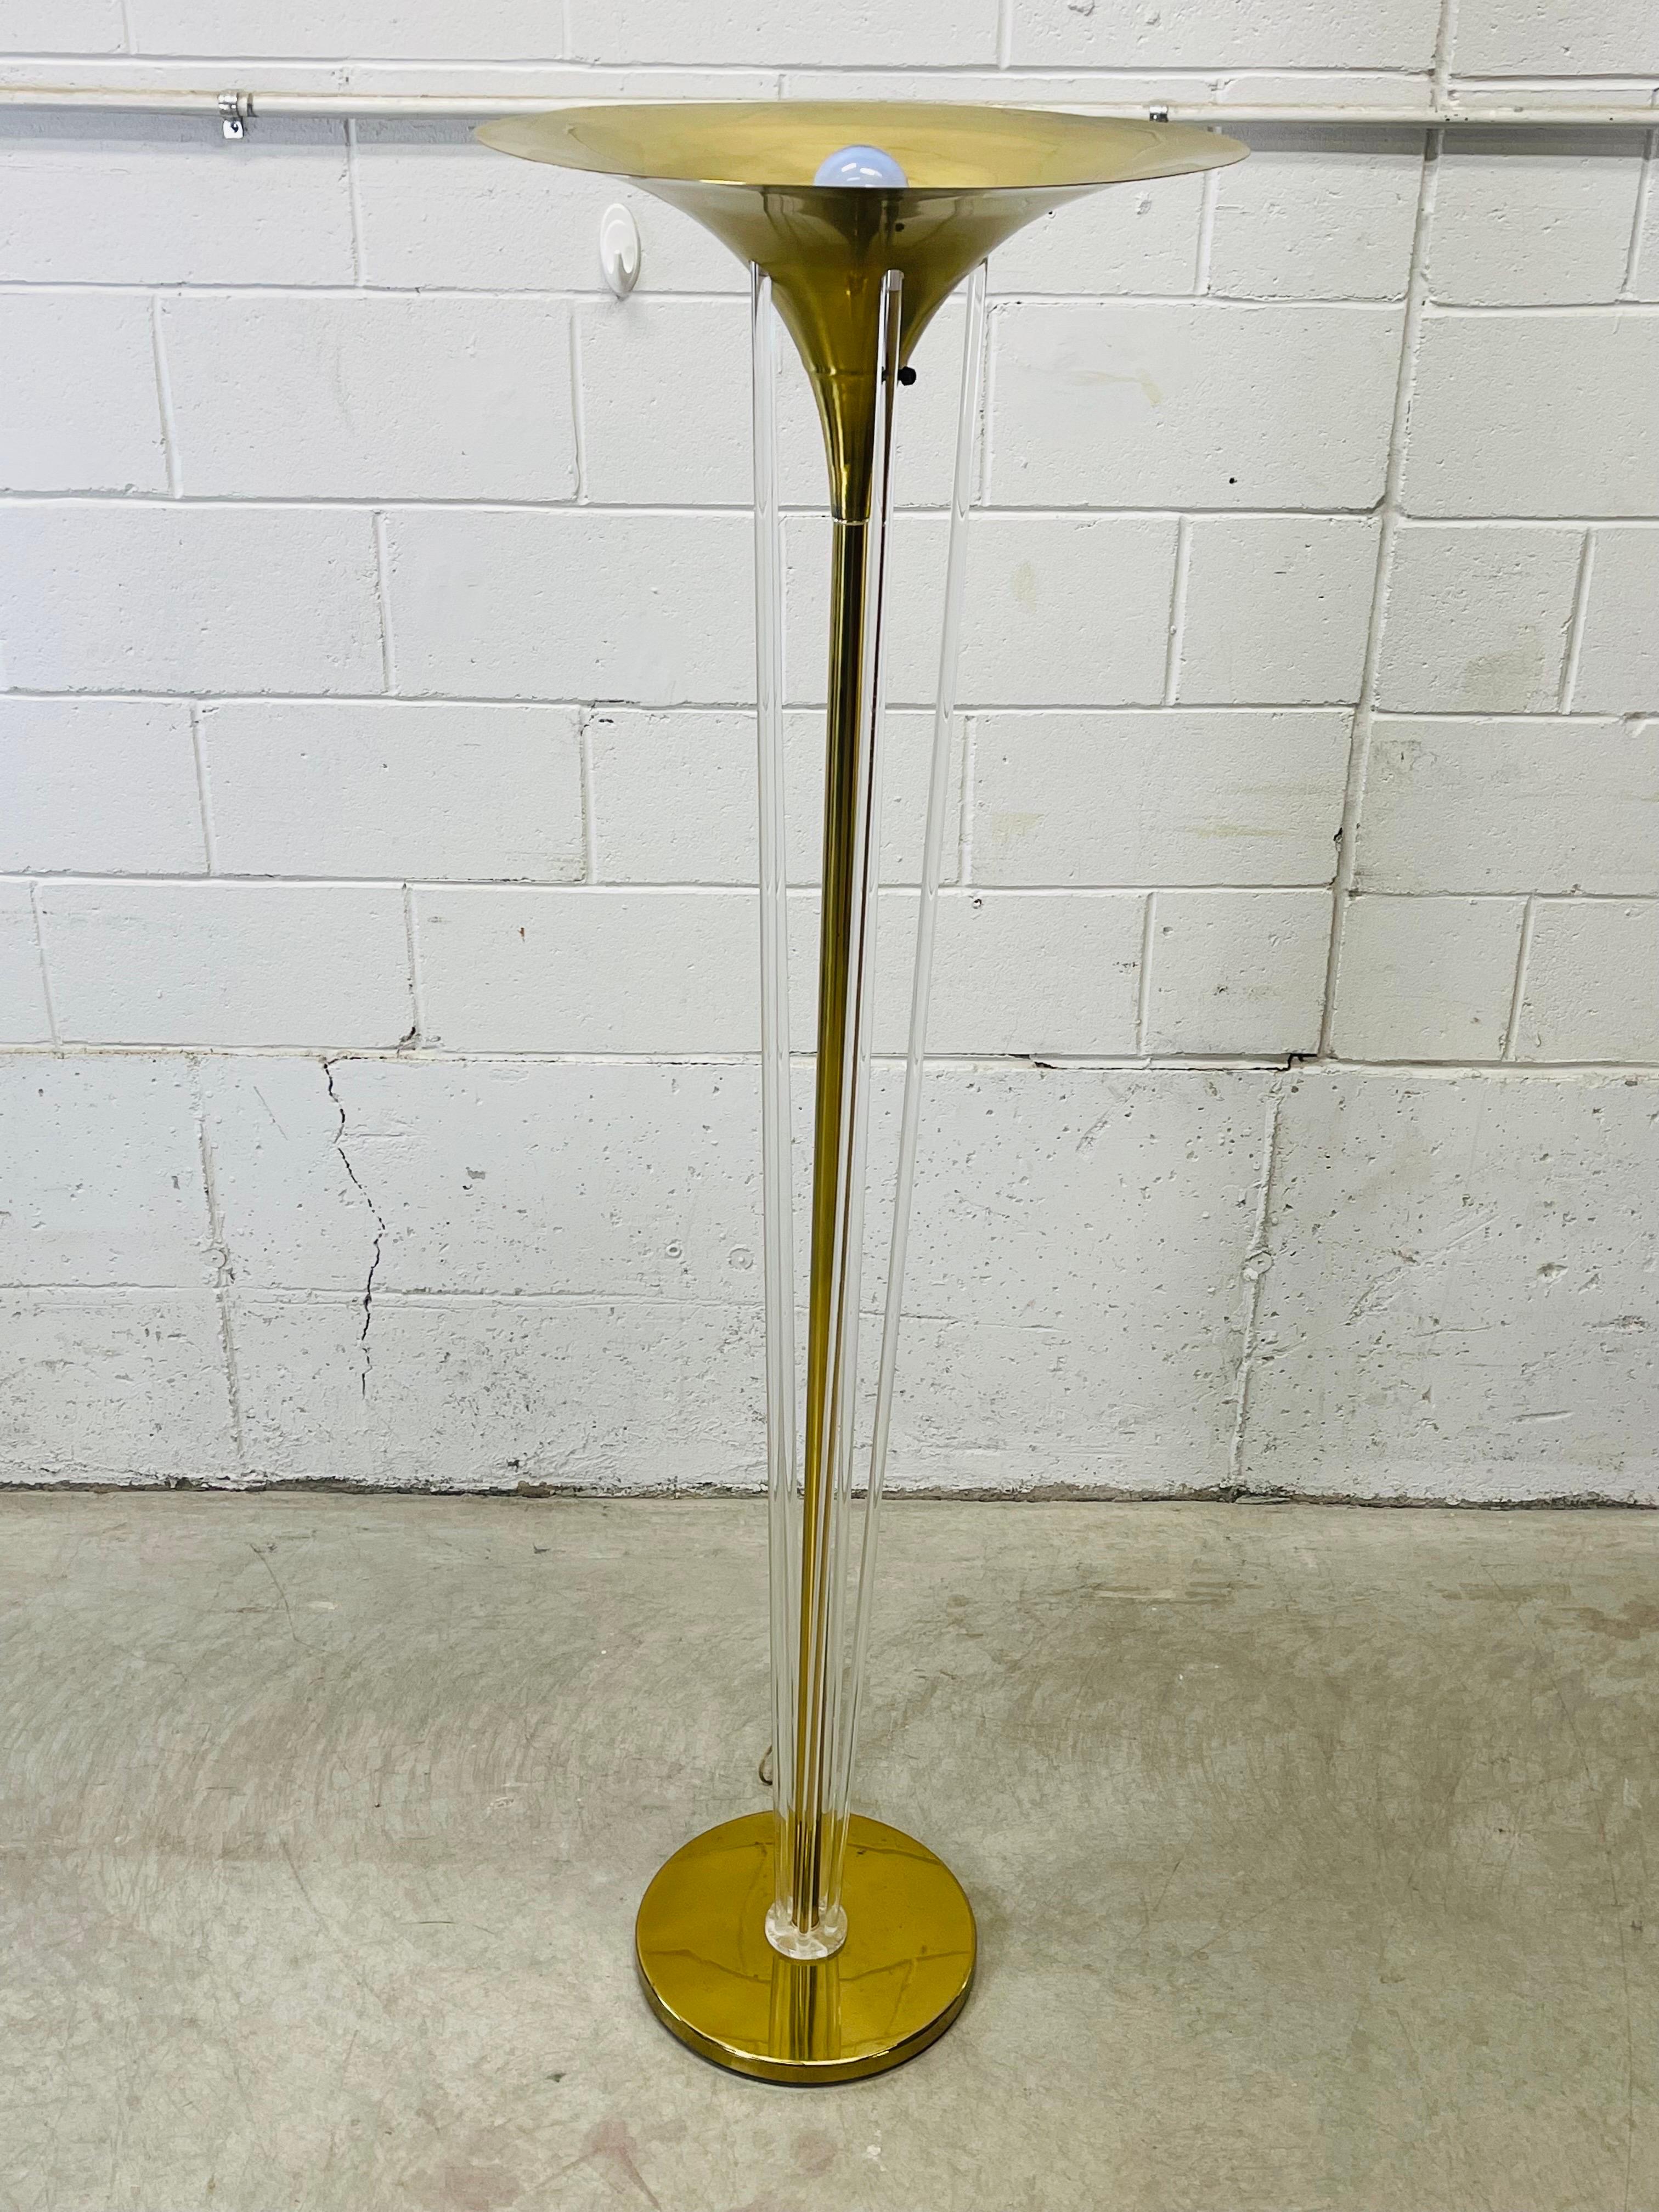 Vintage 1980s brass and lucite torchiere floor lamp. Wired for the US and in working condition. The lamp uses a 3-way standard 100W bulb. The trumpet style shade is 20” Diameter and the base is 13”Diameter. No marks.